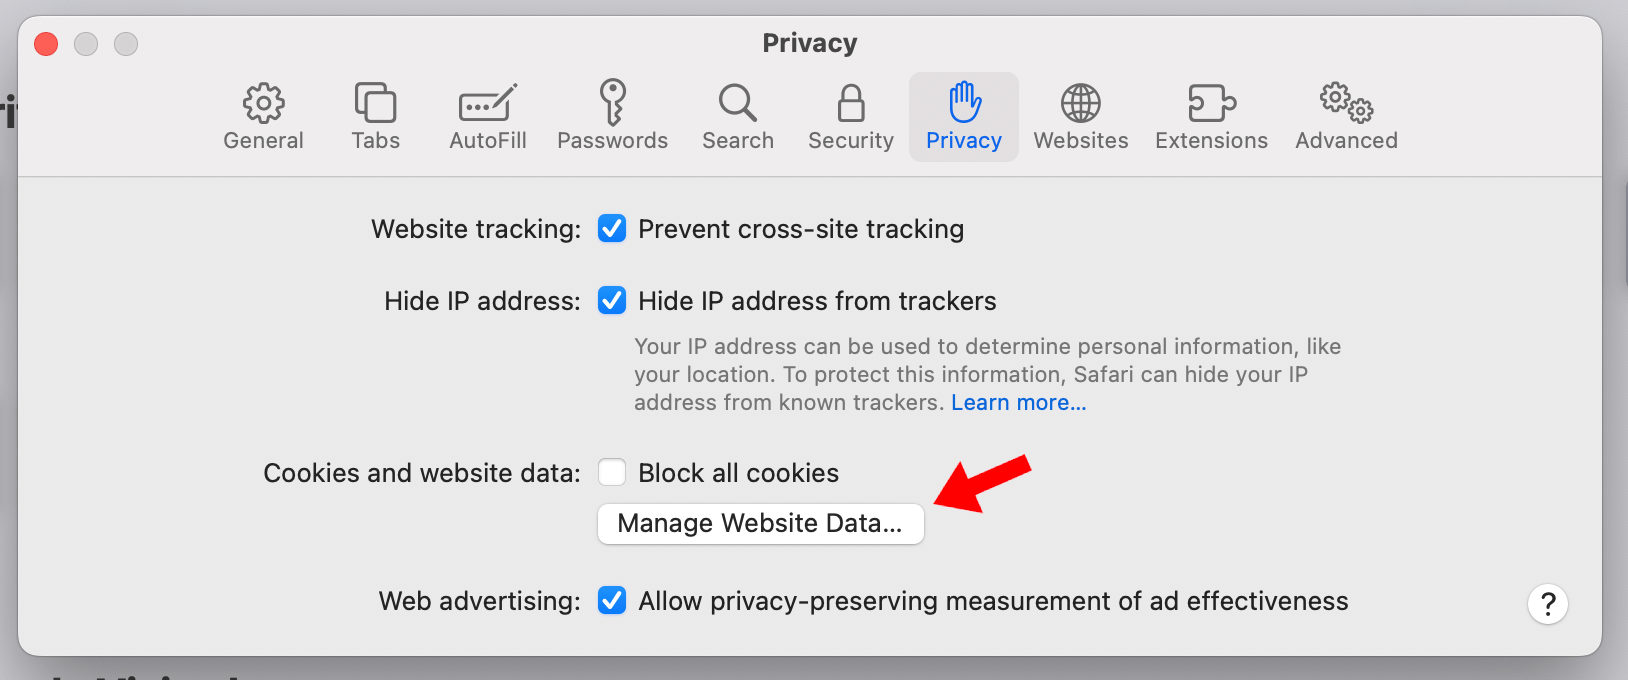 Navigate to the Privacy tab